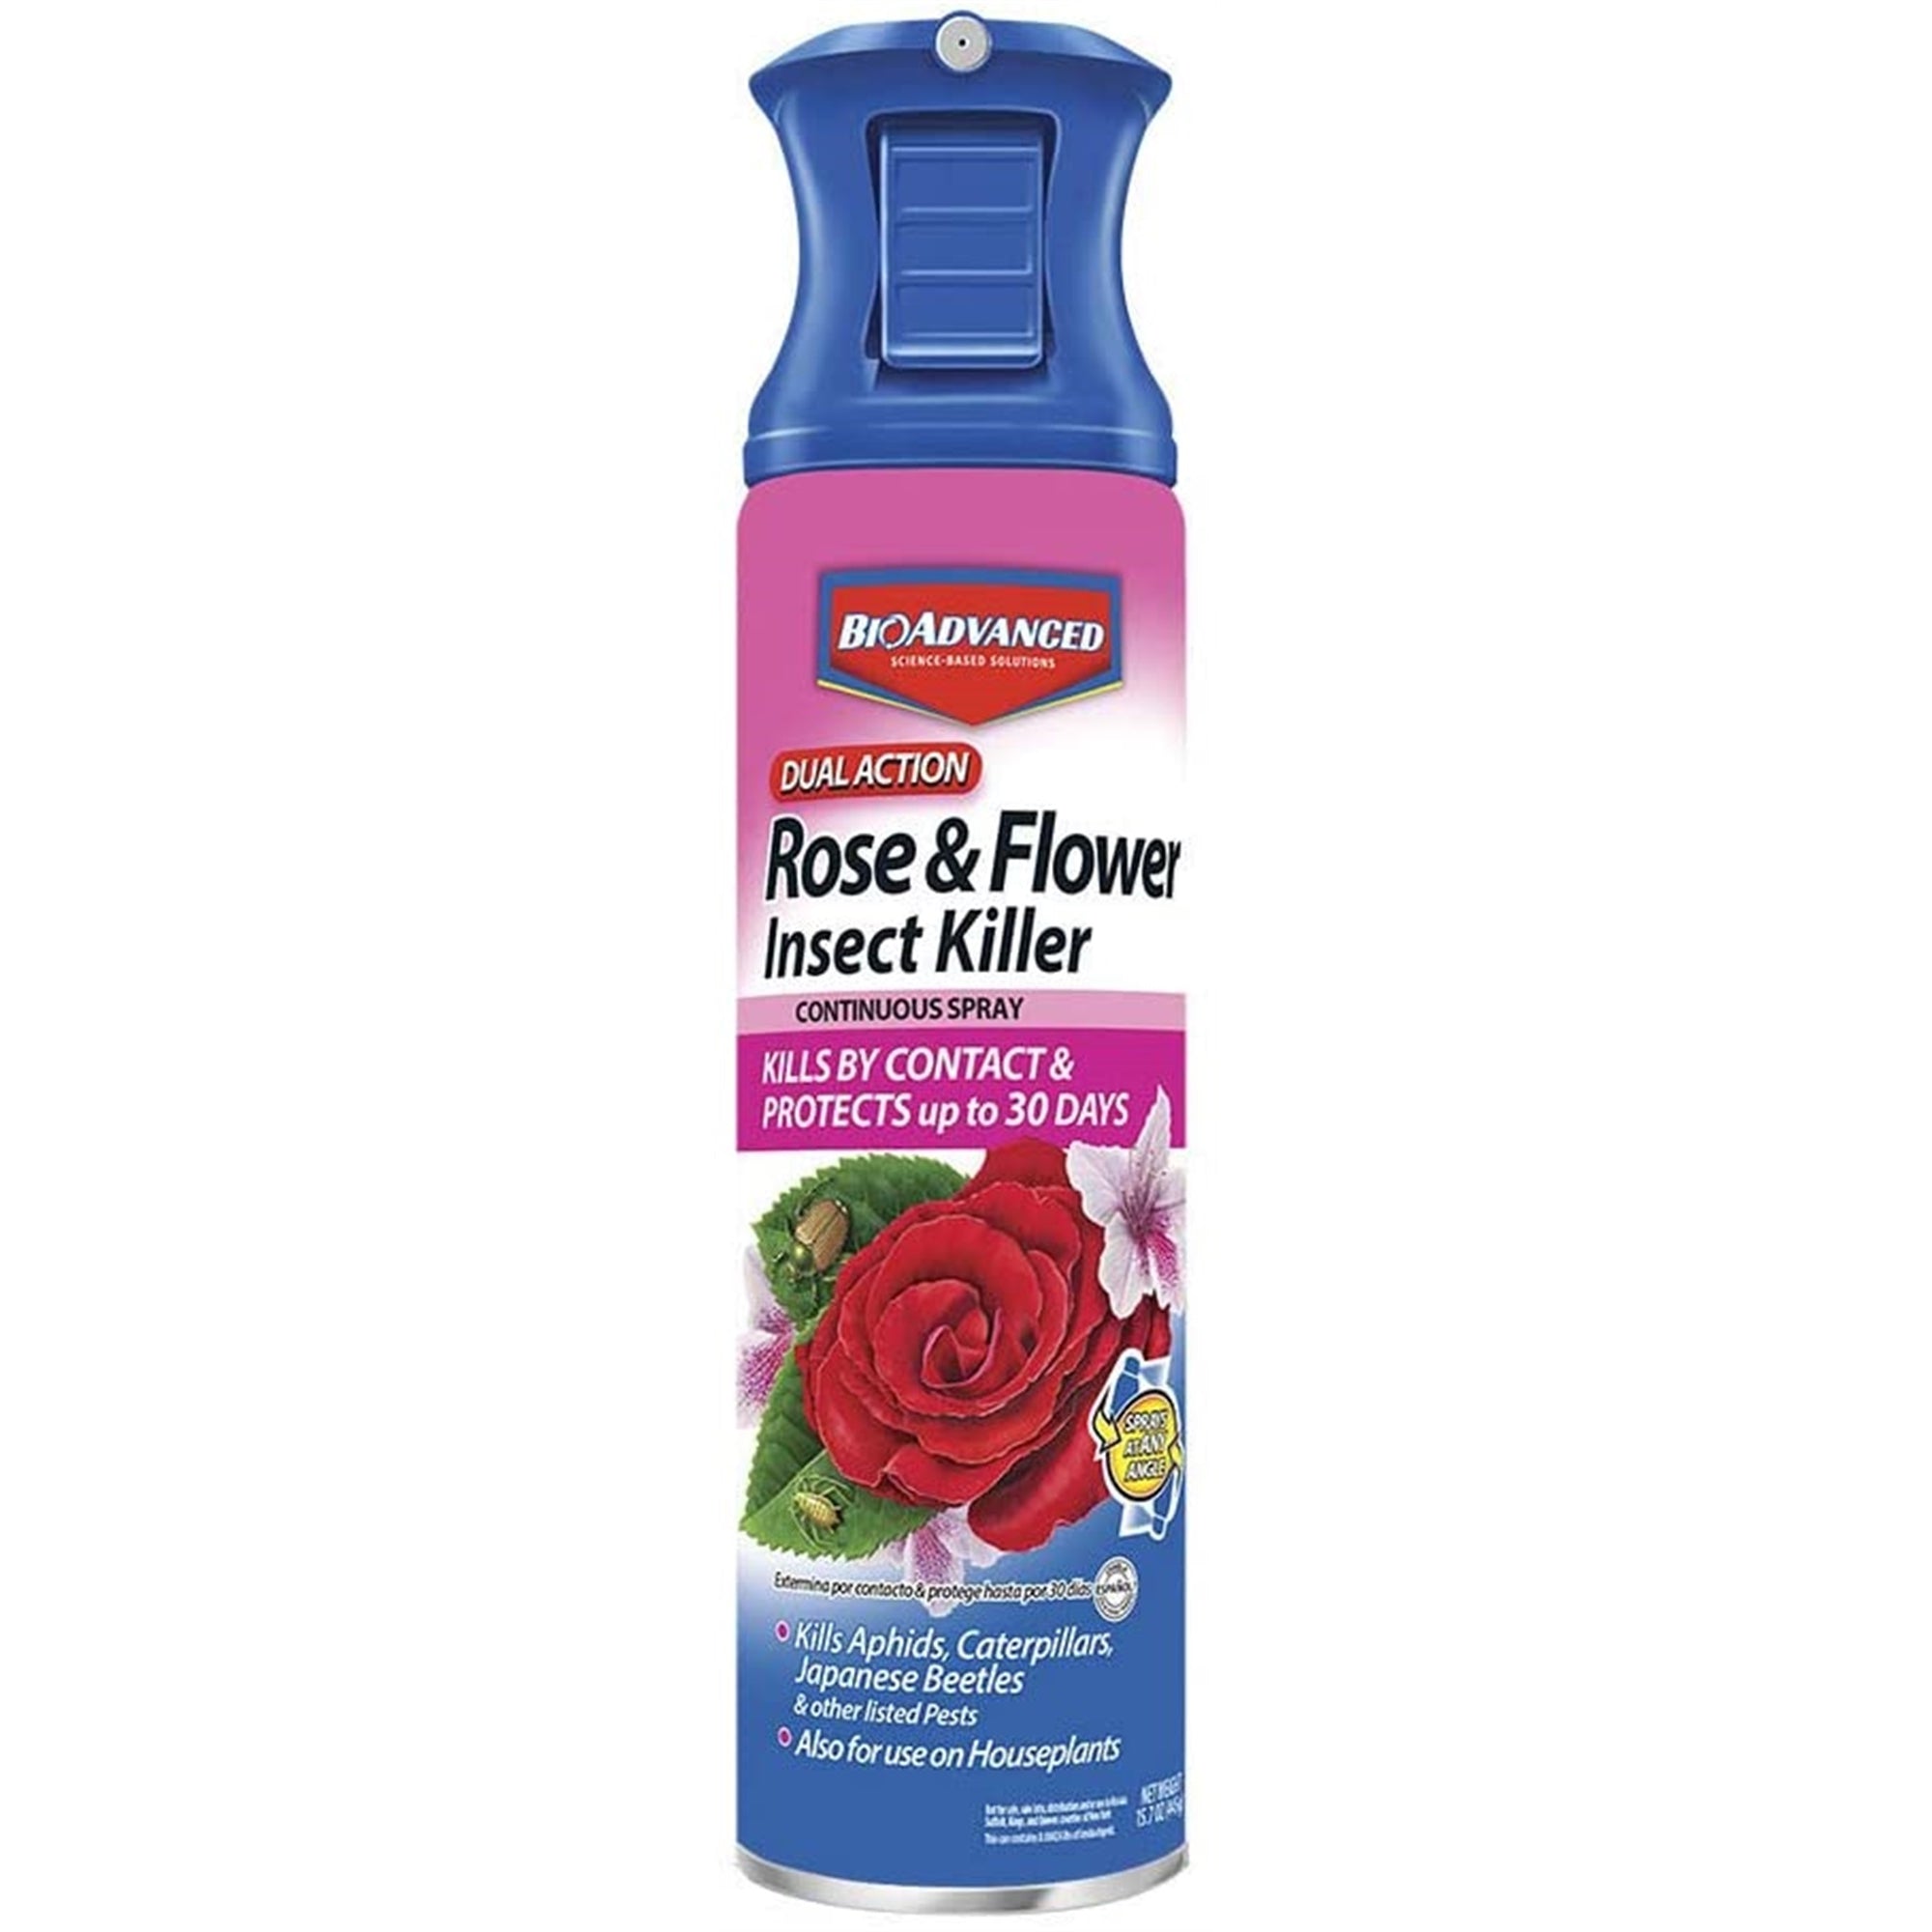 BioAdvanced Dual Action Rose and Flower Insect Killer, Continuous Spray, 15 oz